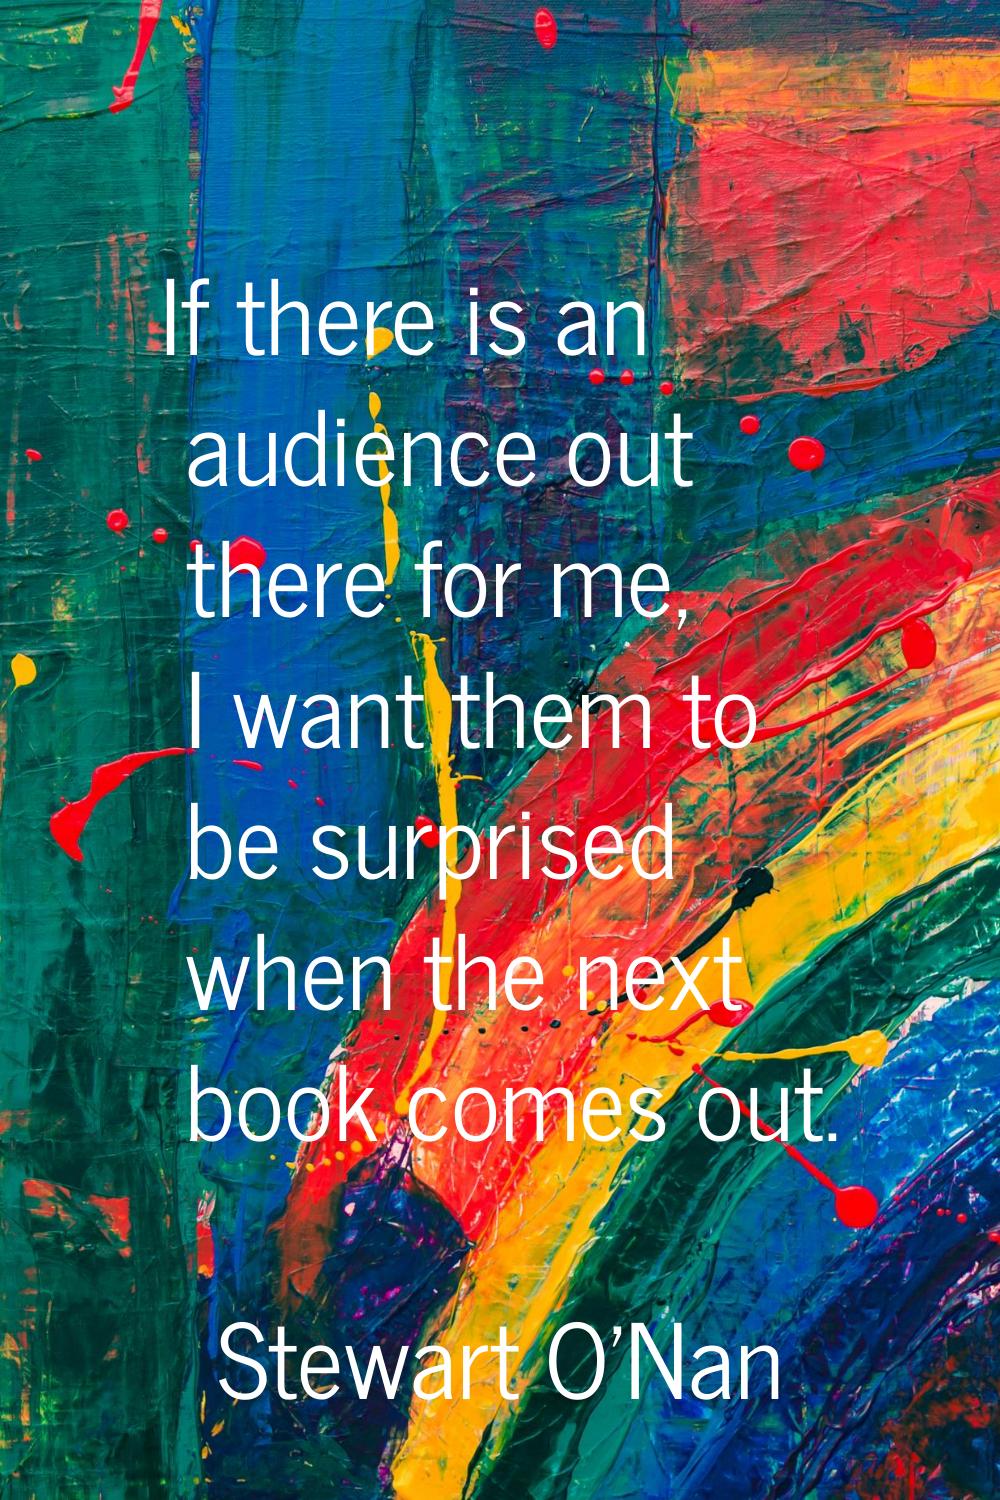 If there is an audience out there for me, I want them to be surprised when the next book comes out.